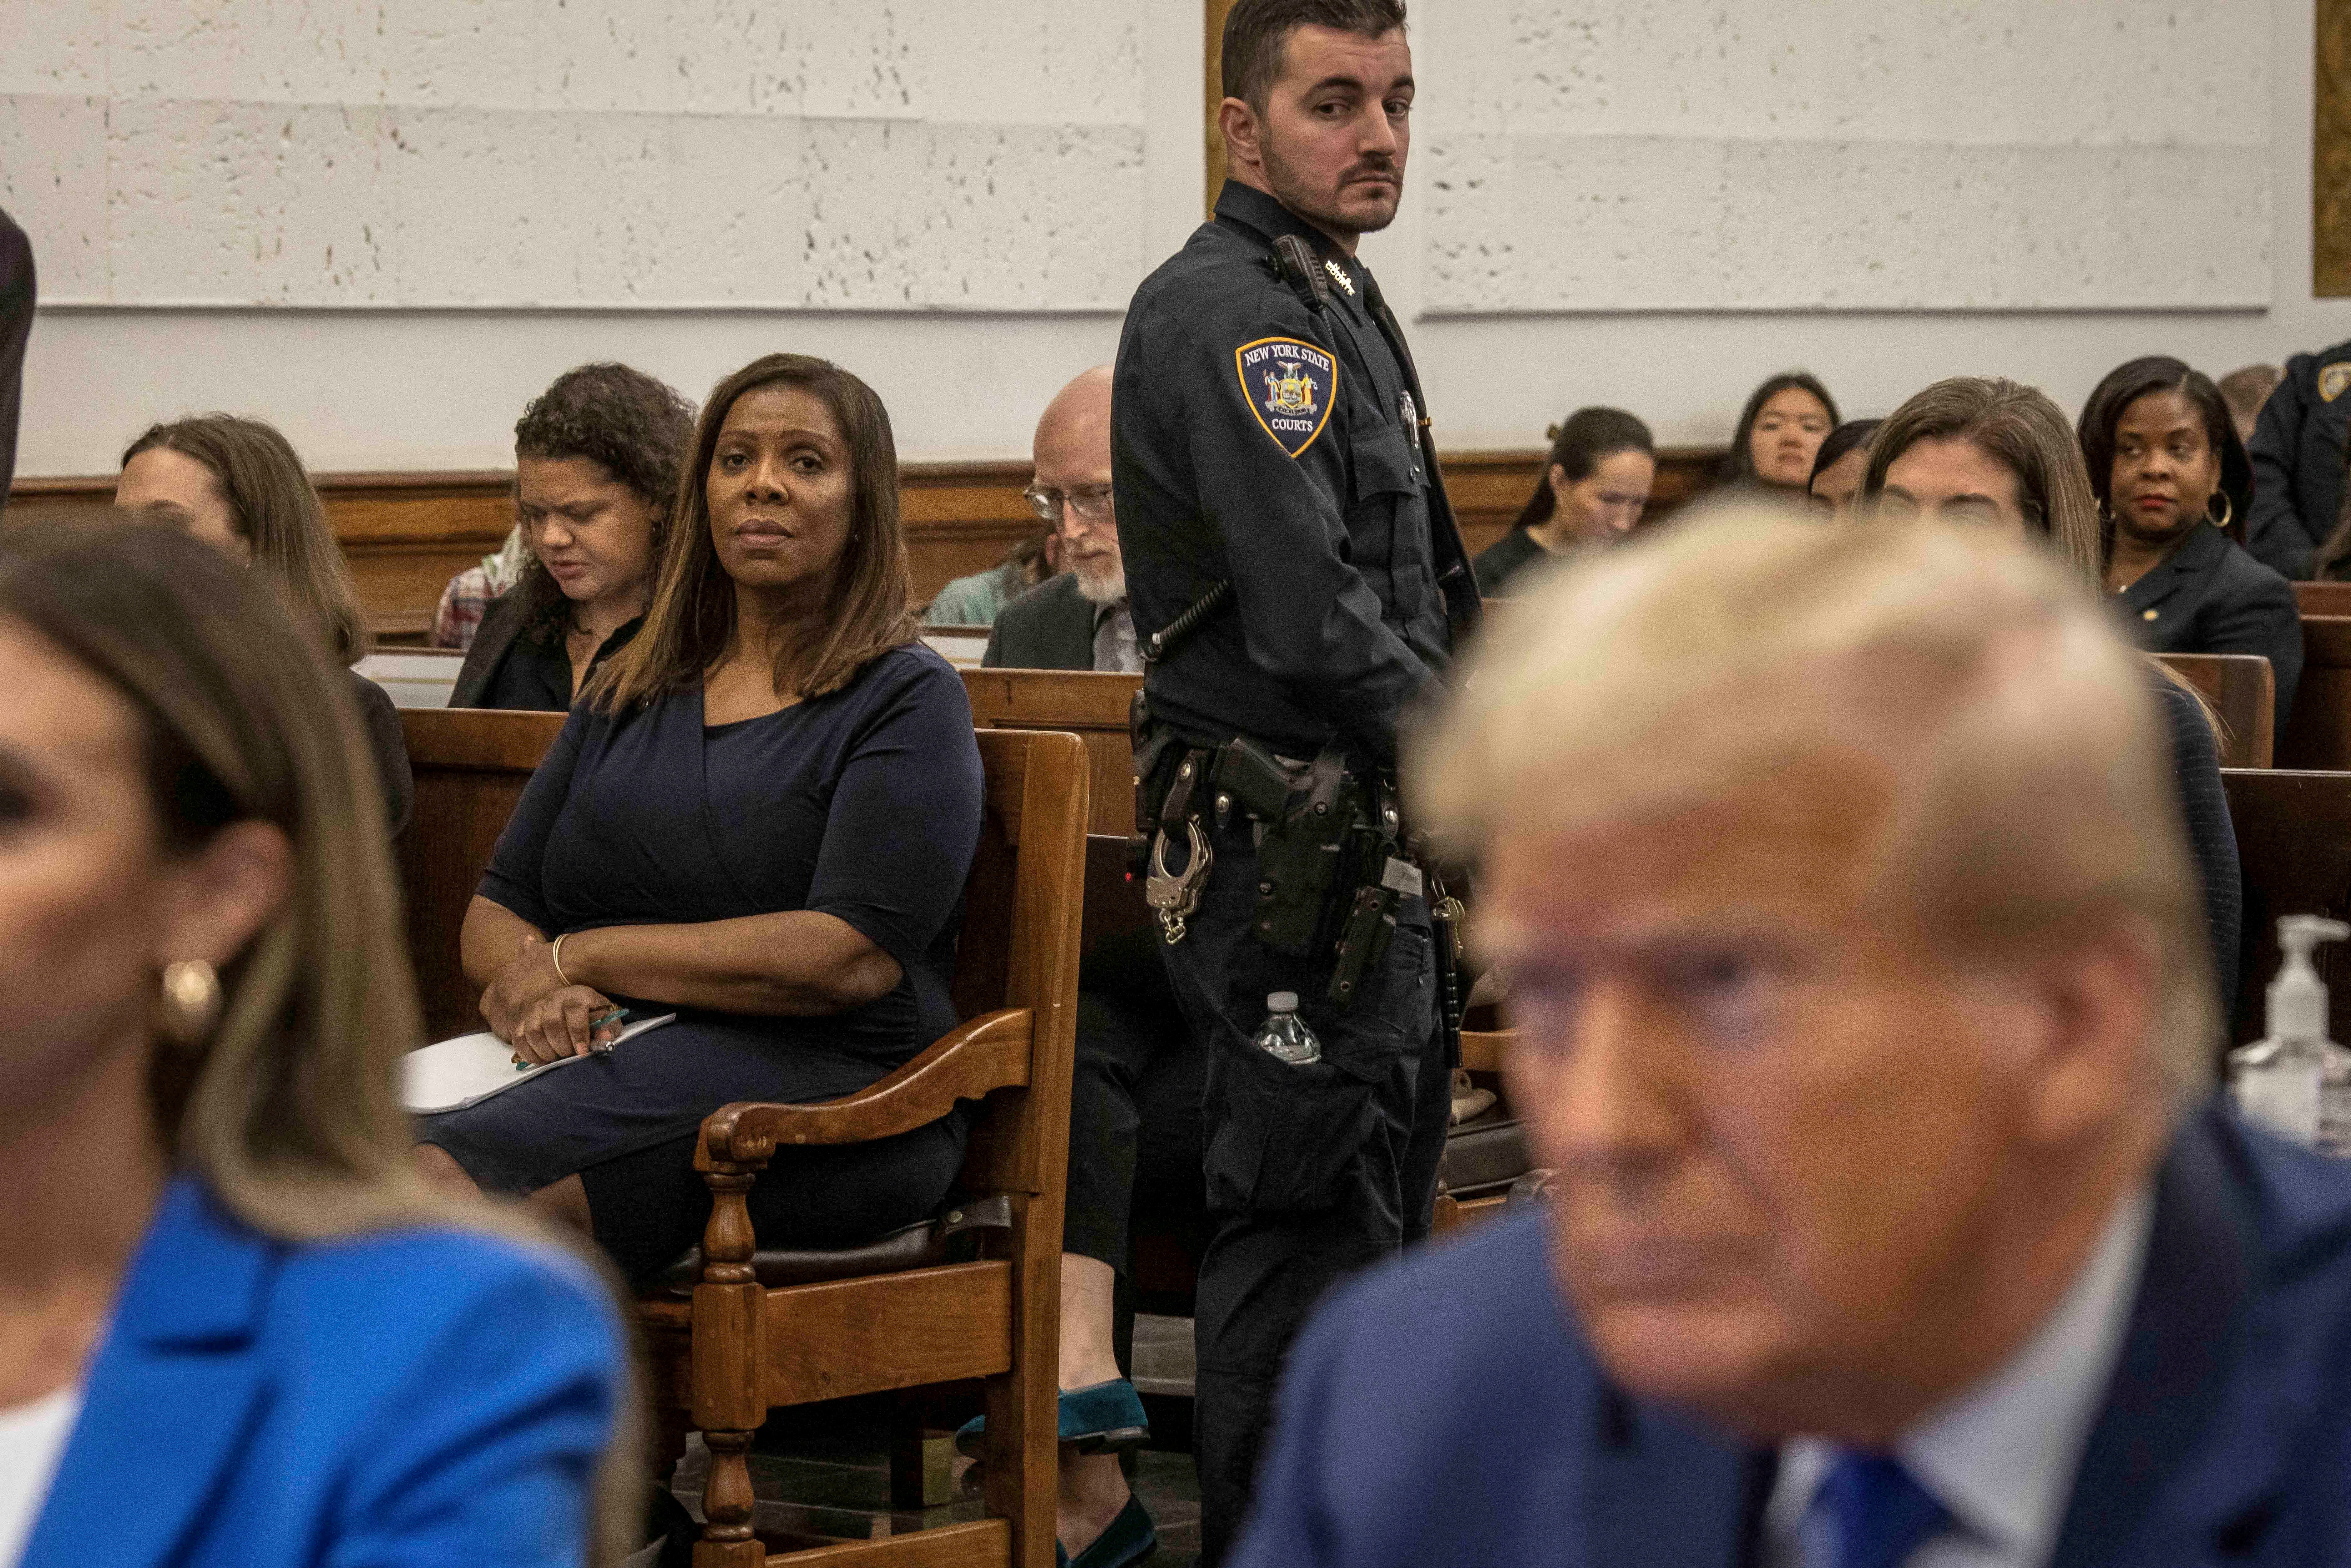 New York Attorney General Letitia James looks on as former US President Donald Trump attends the Trump Organization civil fraud trial on 25 October